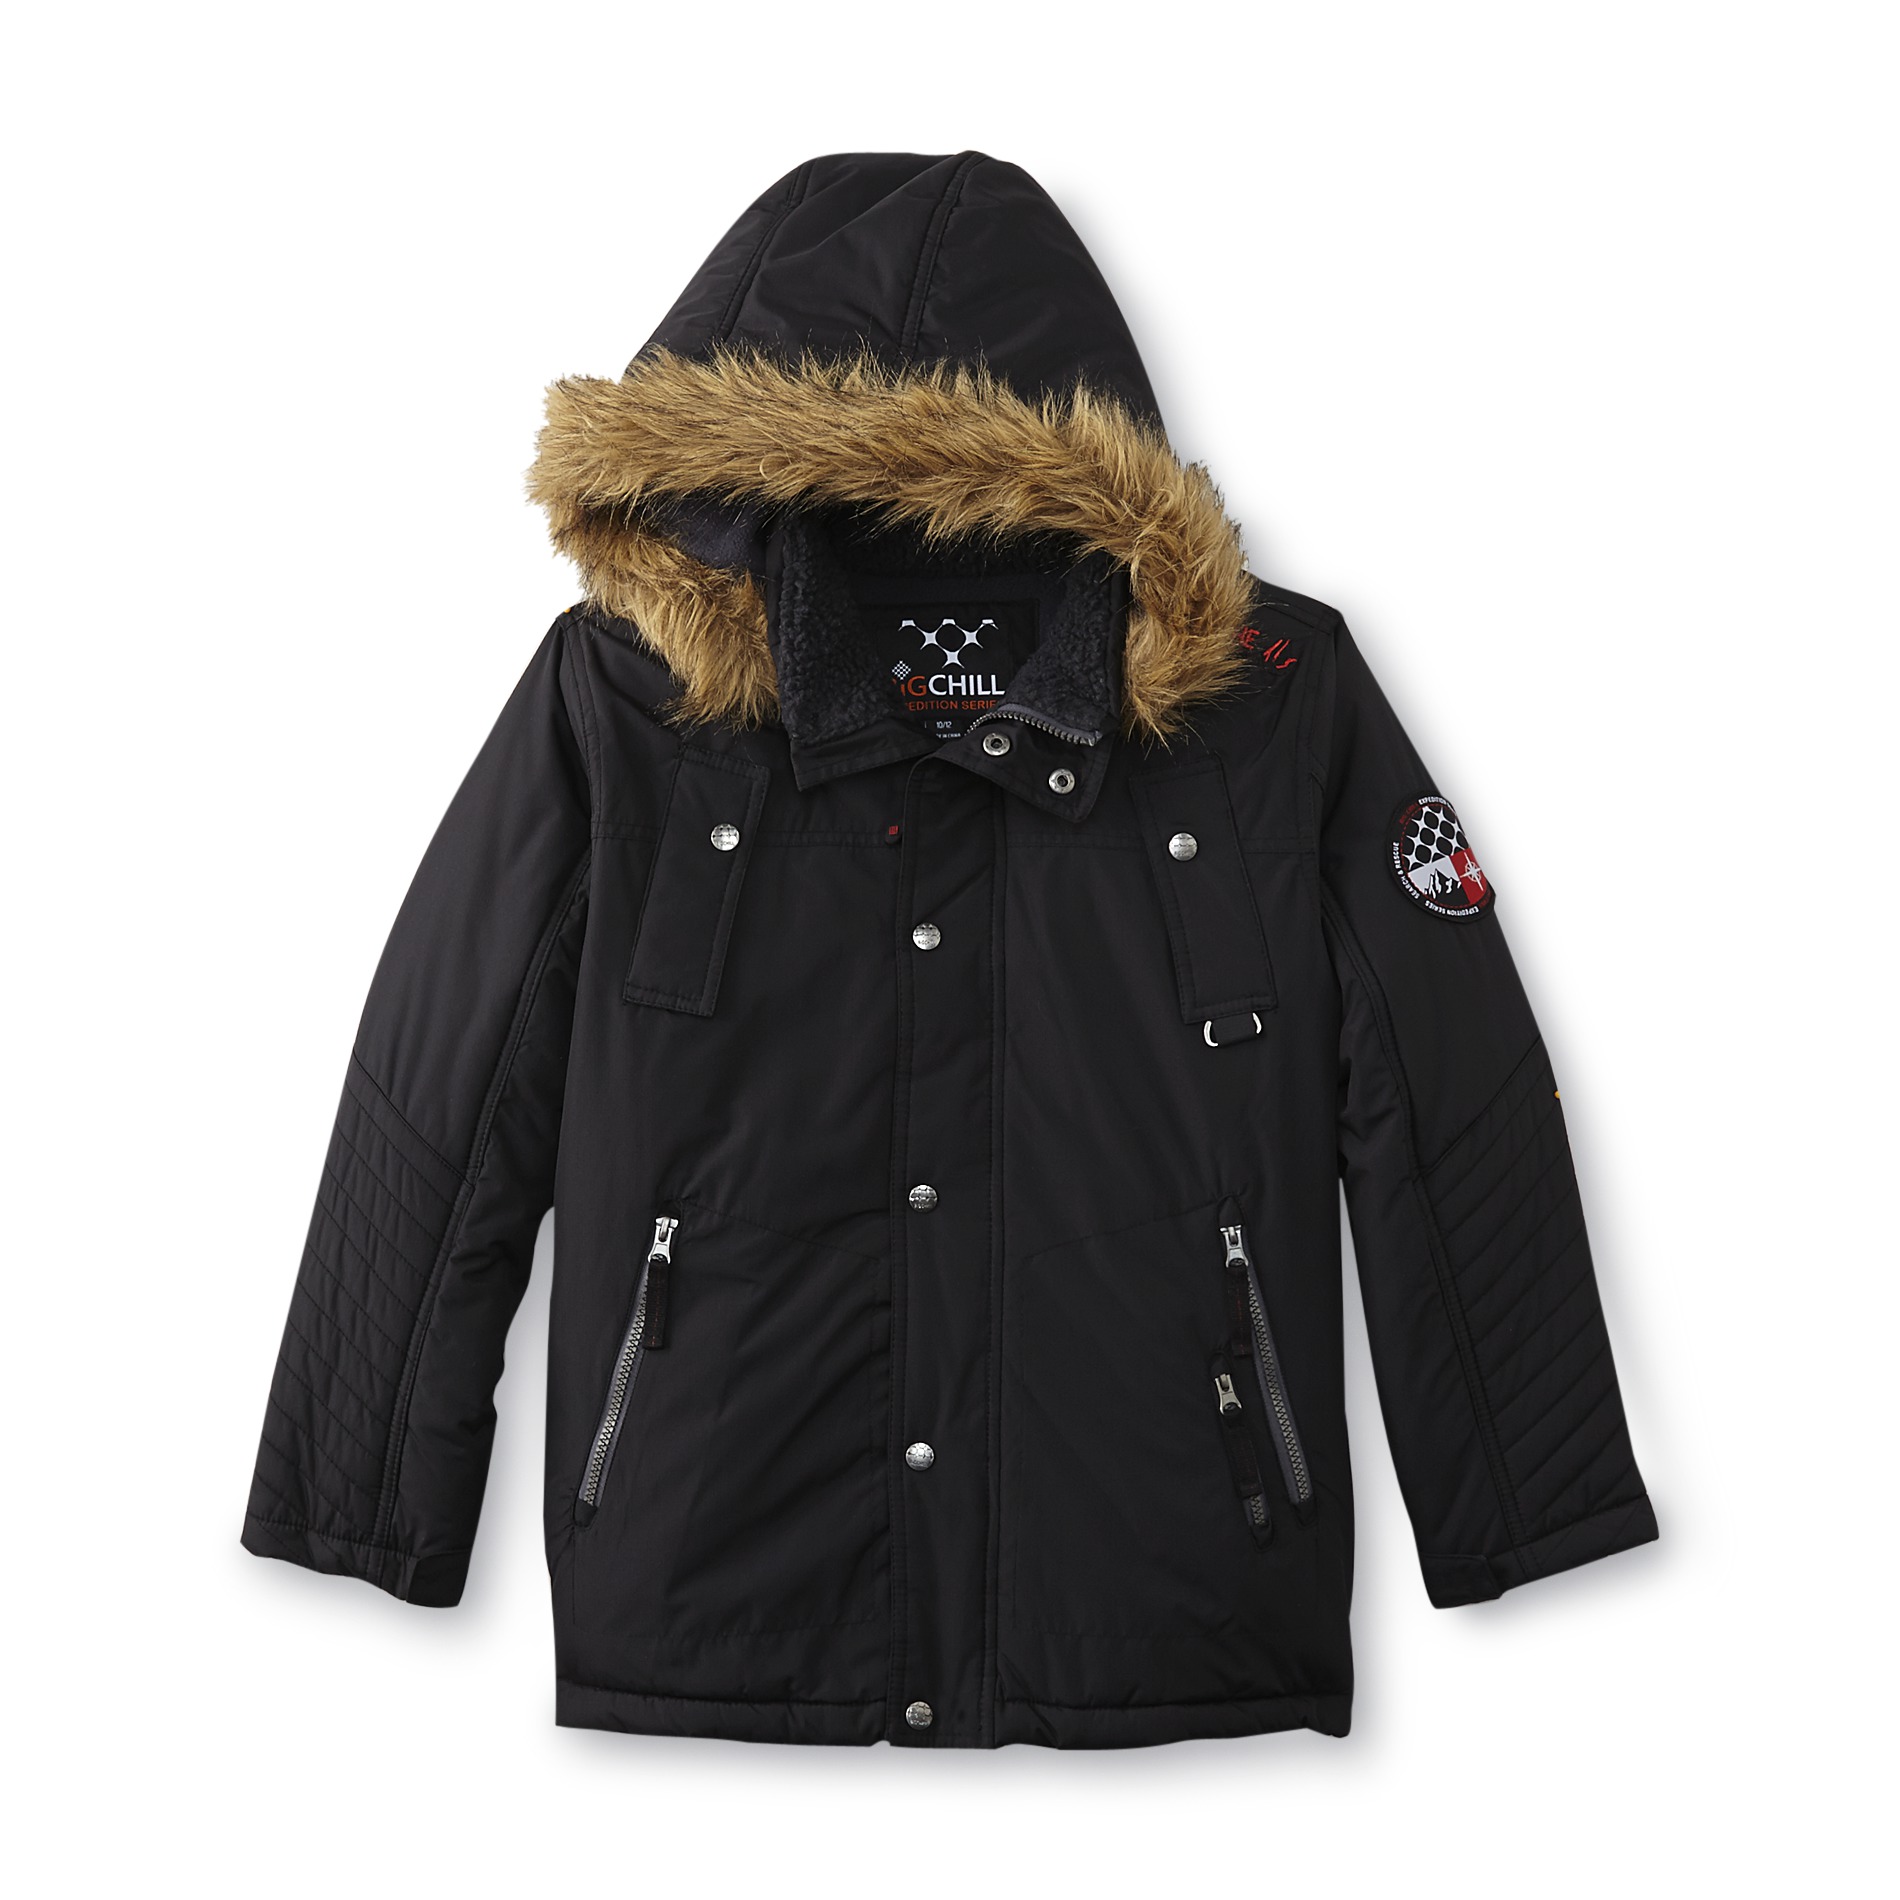 Big Chill Boy's Insulated Hooded Winter Coat